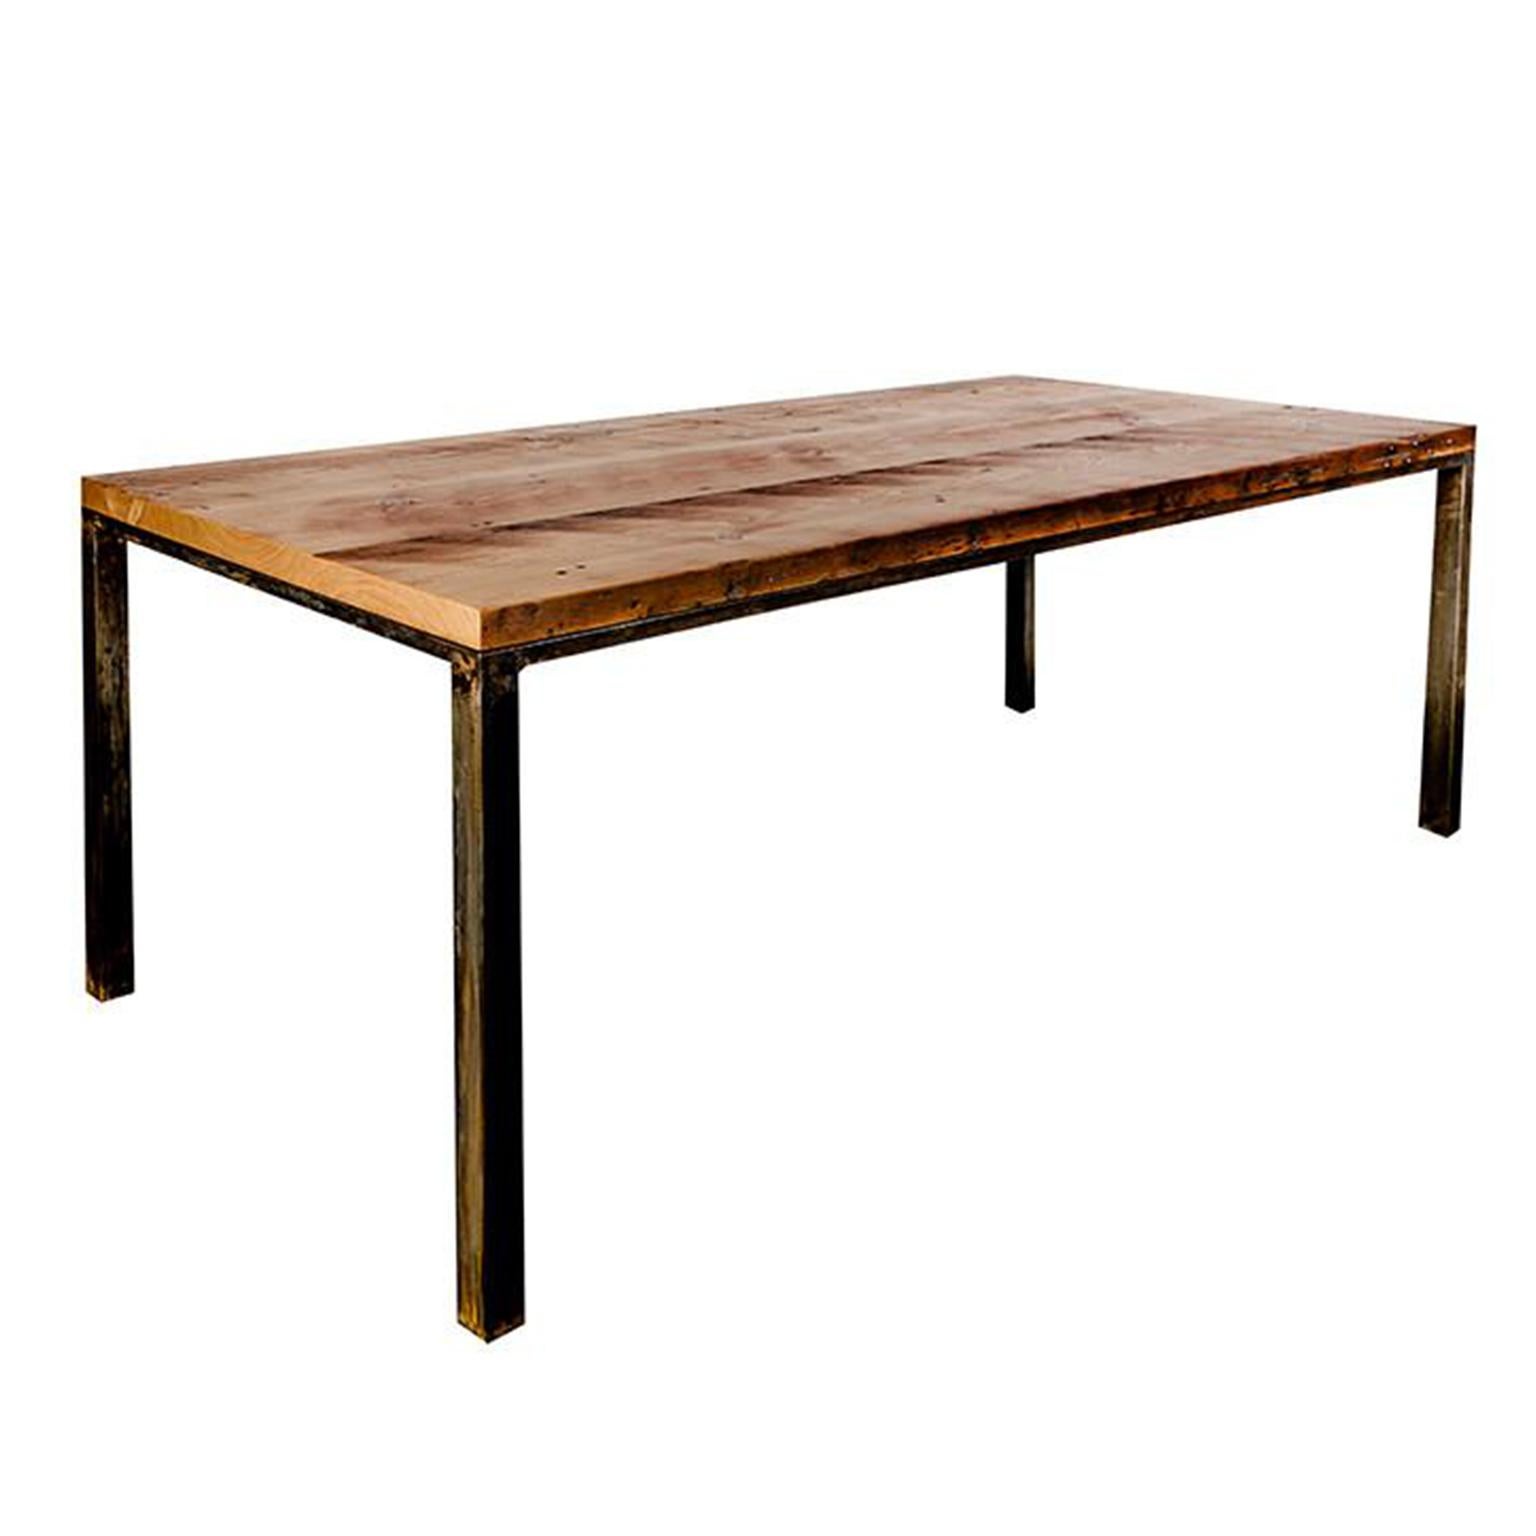 Custom Industrial "Workshop Table" with Solid Wood Top and Steel Base, Small For Sale